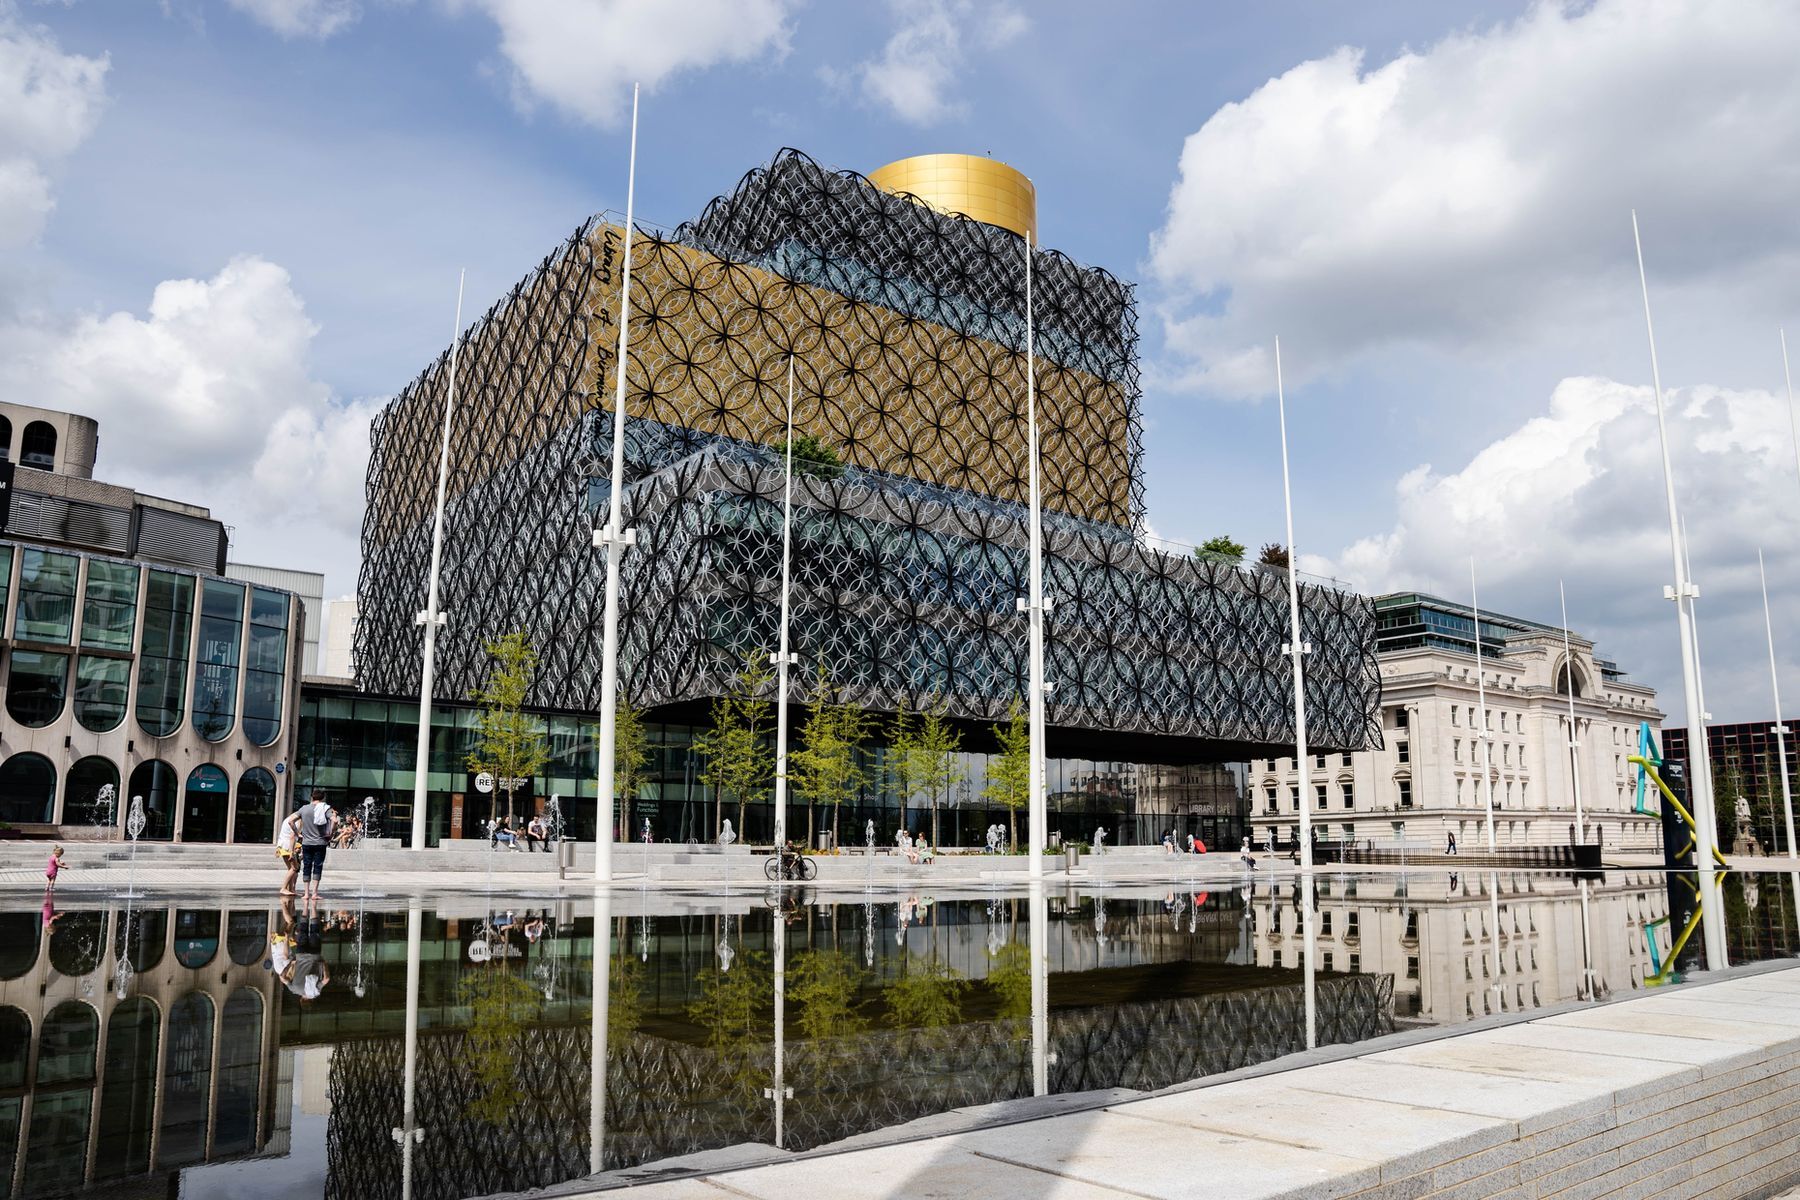 <p>When you’re visiting England, London may well be calling. However, skipping a trip to the country’s <a href="https://www.britannica.com/place/Birmingham-England">second-biggest city</a> is a real mistake. Birmingham is a vibrant place brimming with captivating things to do, Michelin-starred restaurants to sample, and more canals than Venice. If you’re planning a trip to the busy and bustling centre, we’ve got you covered. In the following guide, we take a look at some of the must-see attractions the city has to offer.</p>